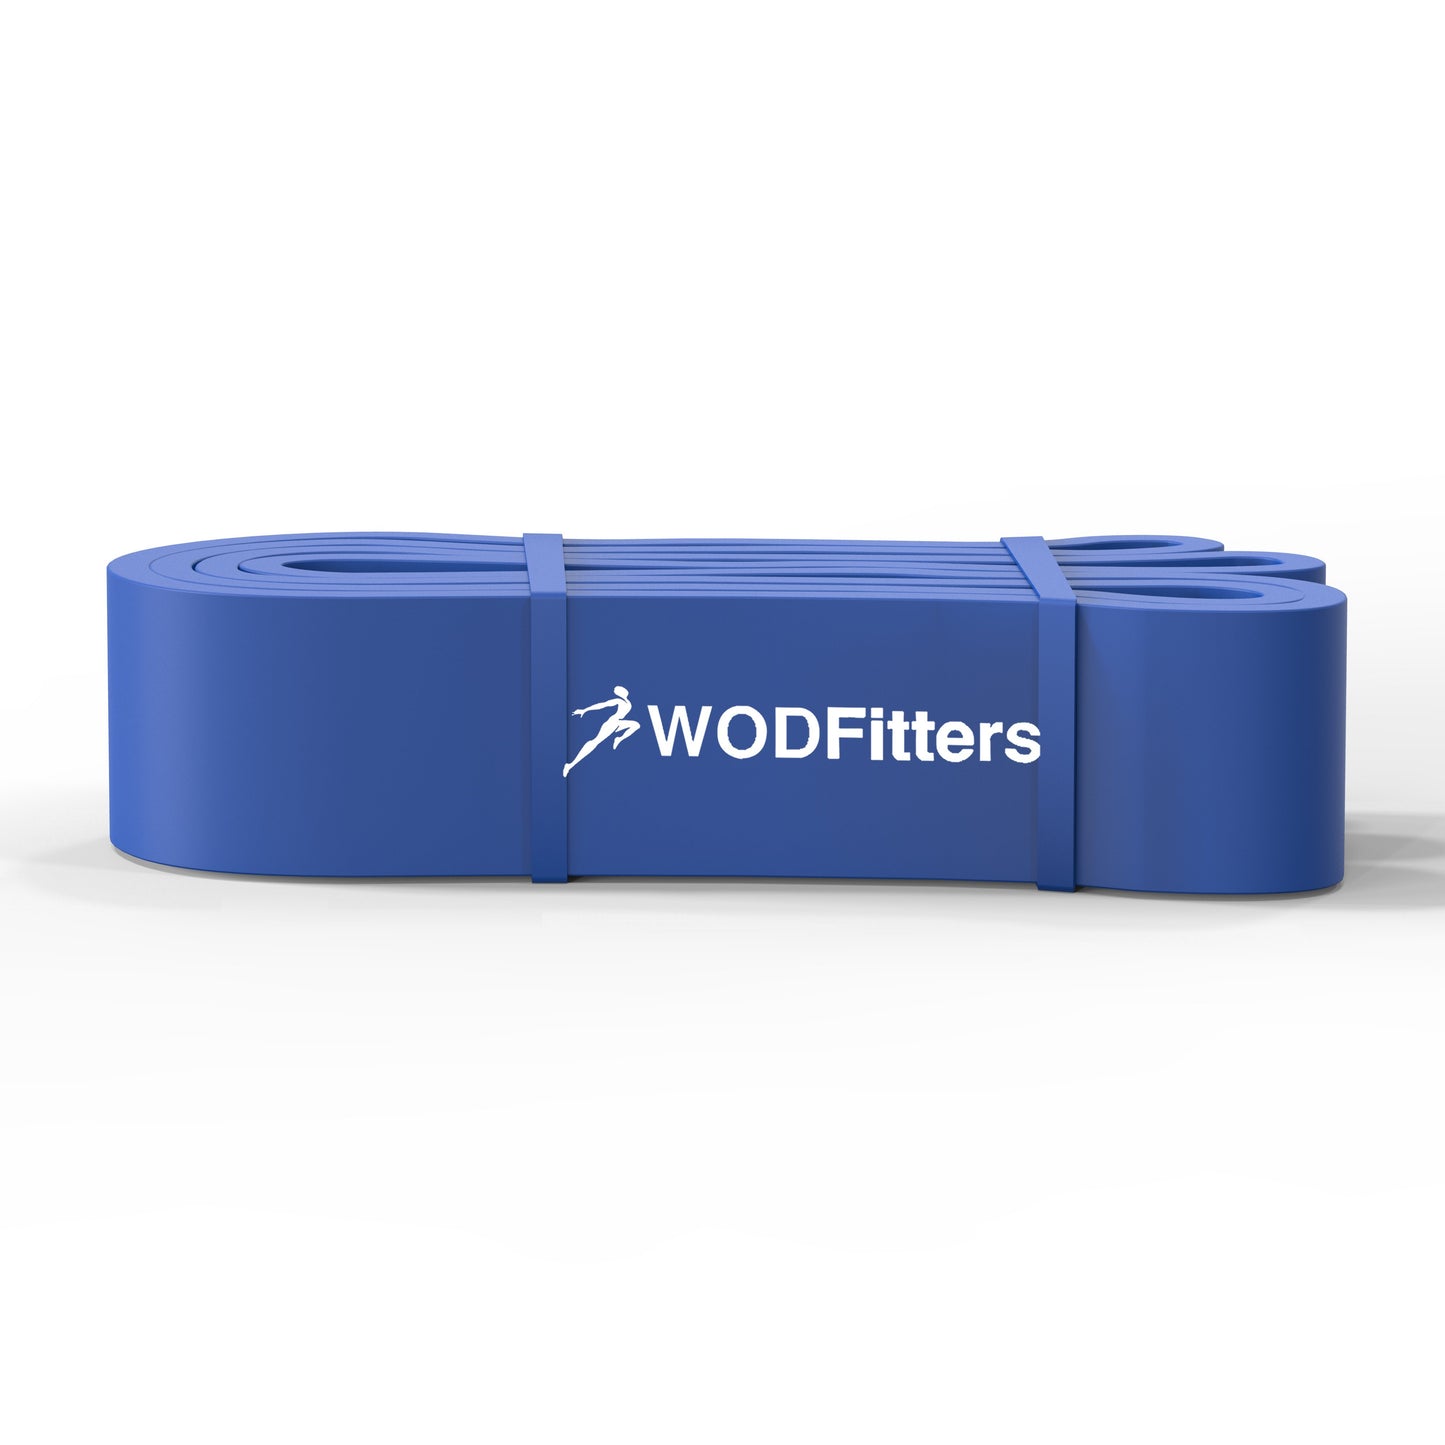 WODFitters Assisted Pull-Up Resistance Bands for Cross Training and Power-Lifting (Choose 4 or 5 Band Set or Single Band) 